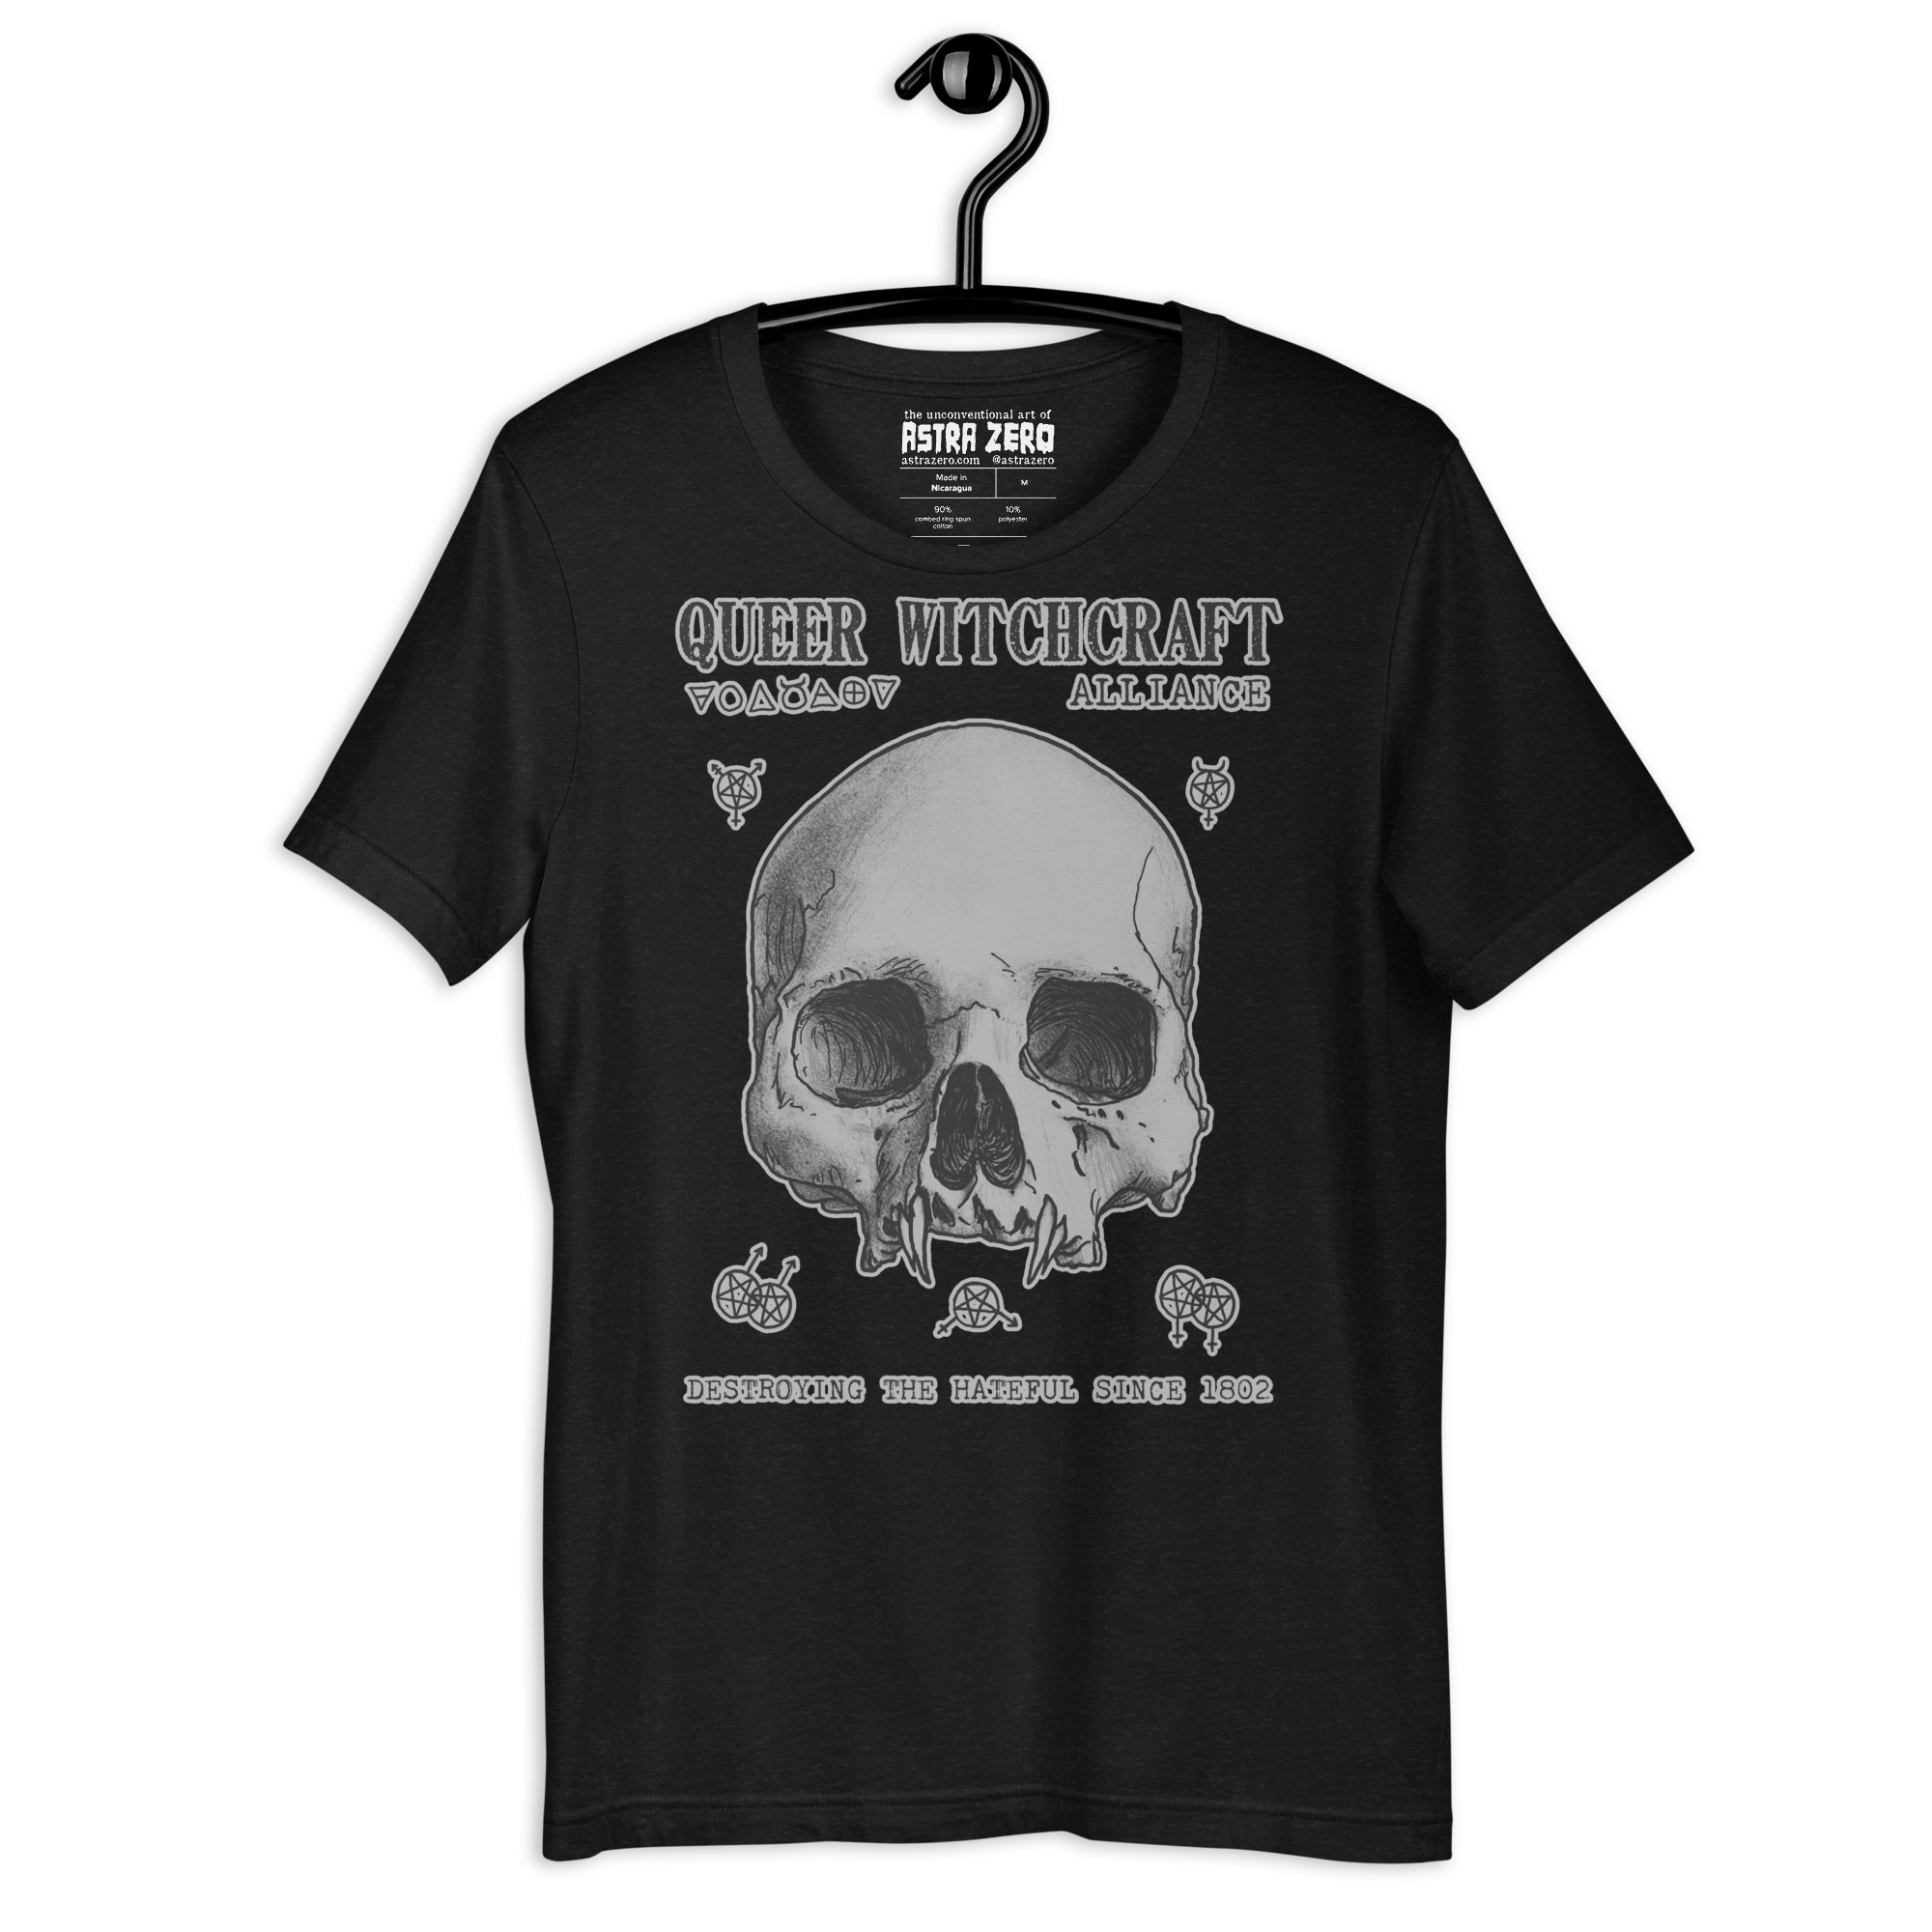 Featured image for “Queer Witchcraft alliance skull - Unisex t-shirt”